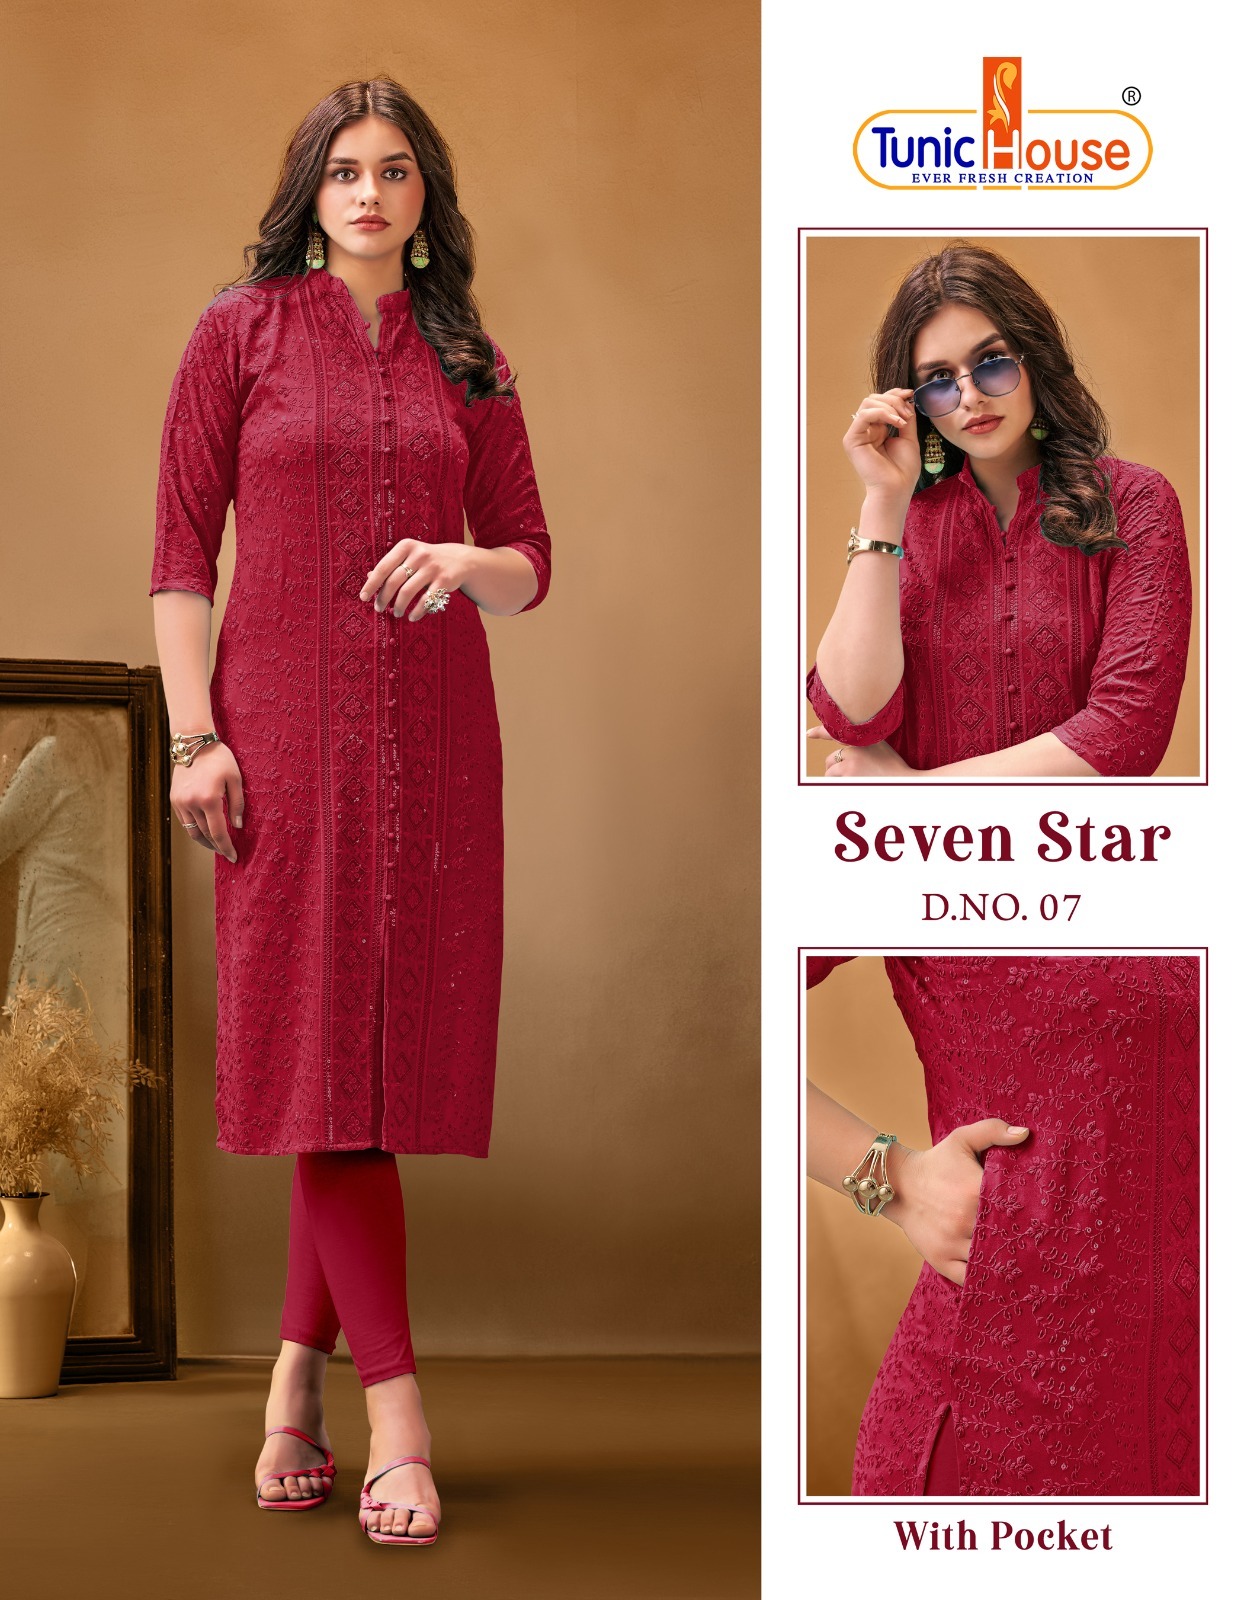 Tunic Houes 7 Star collection 18